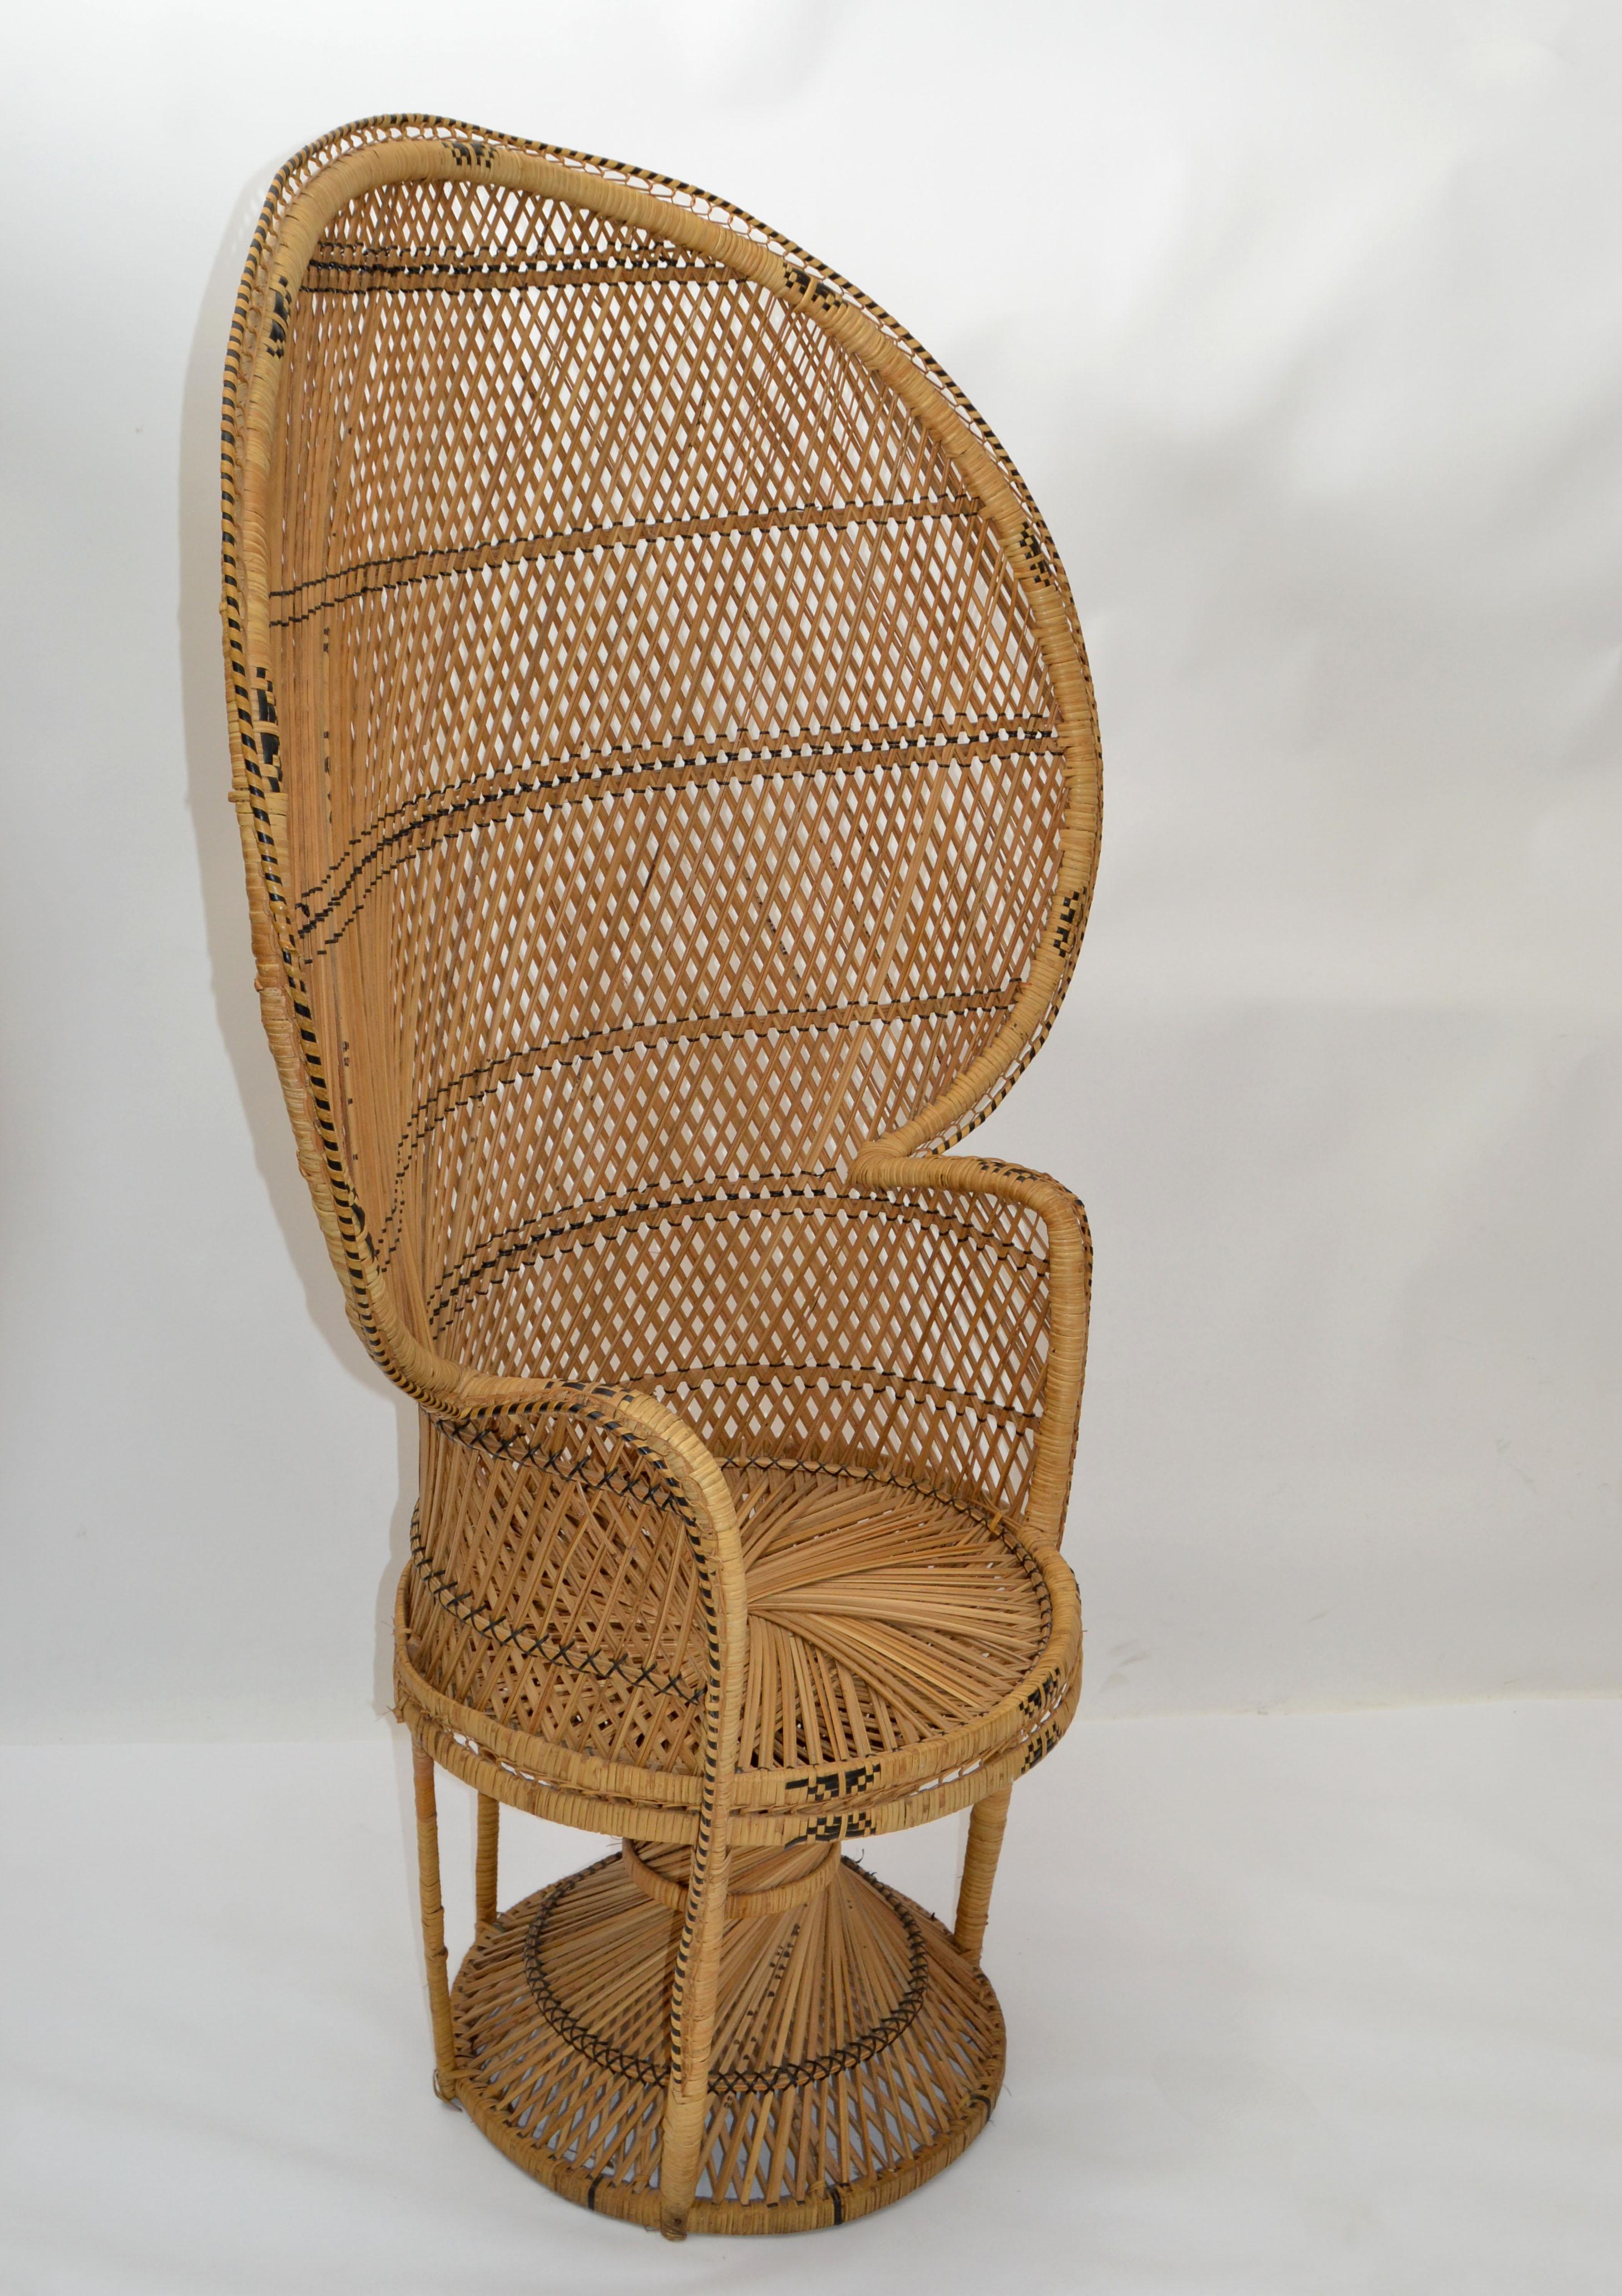 Vintage Boho Chic Handcrafted Beige & Black Wicker, Rattan, Reed Peacock Chair For Sale 5